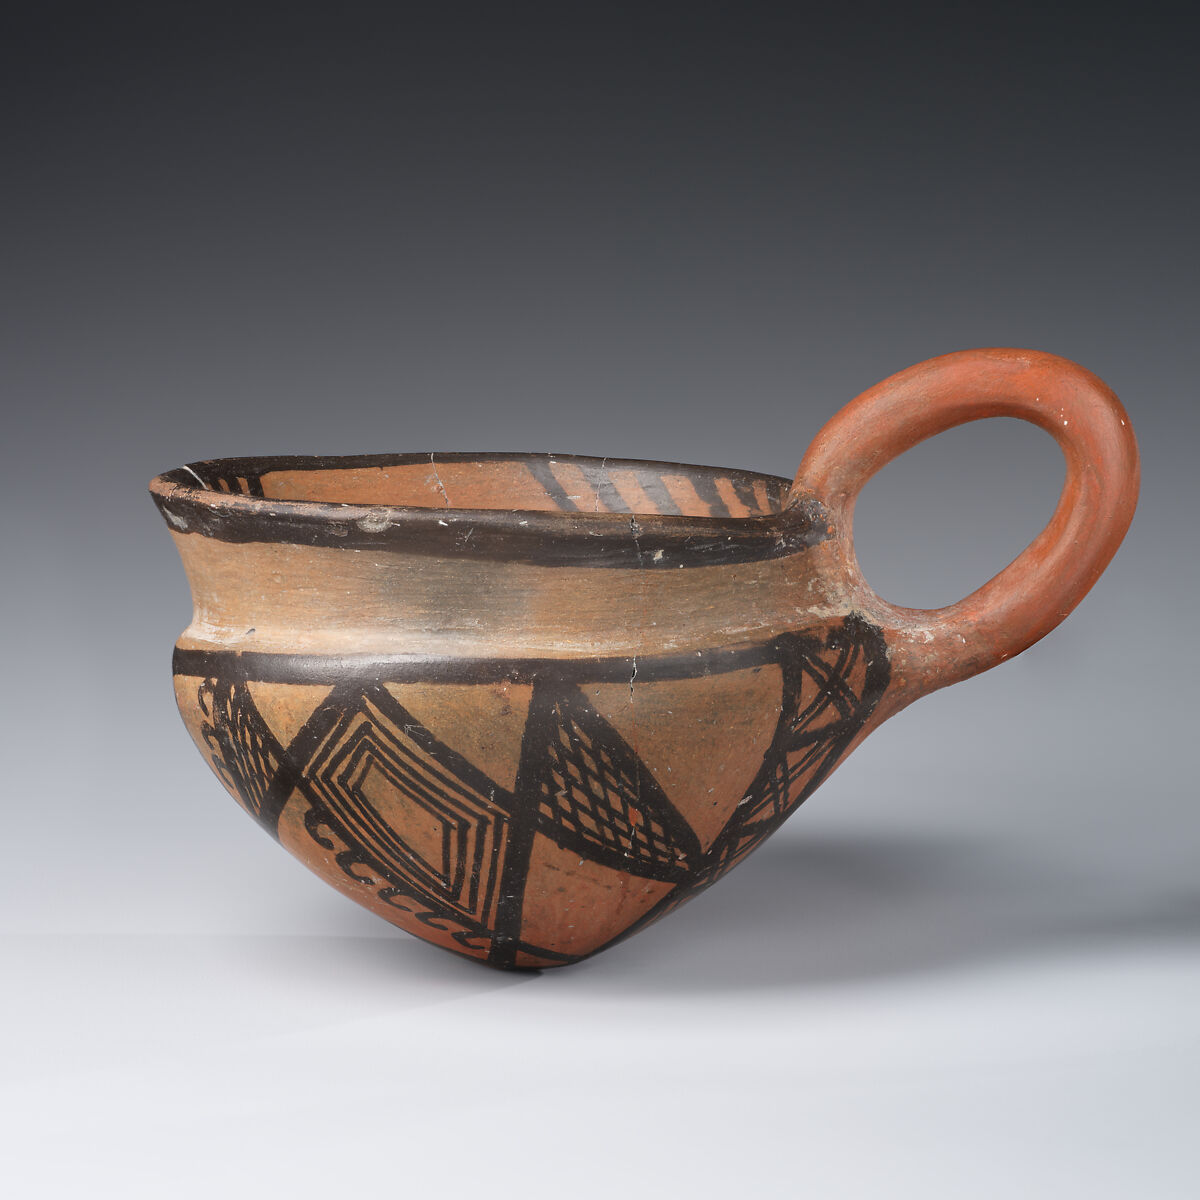 Vessel, Ceramic, paint, Old Assyrian Trading Colony or Hittite 